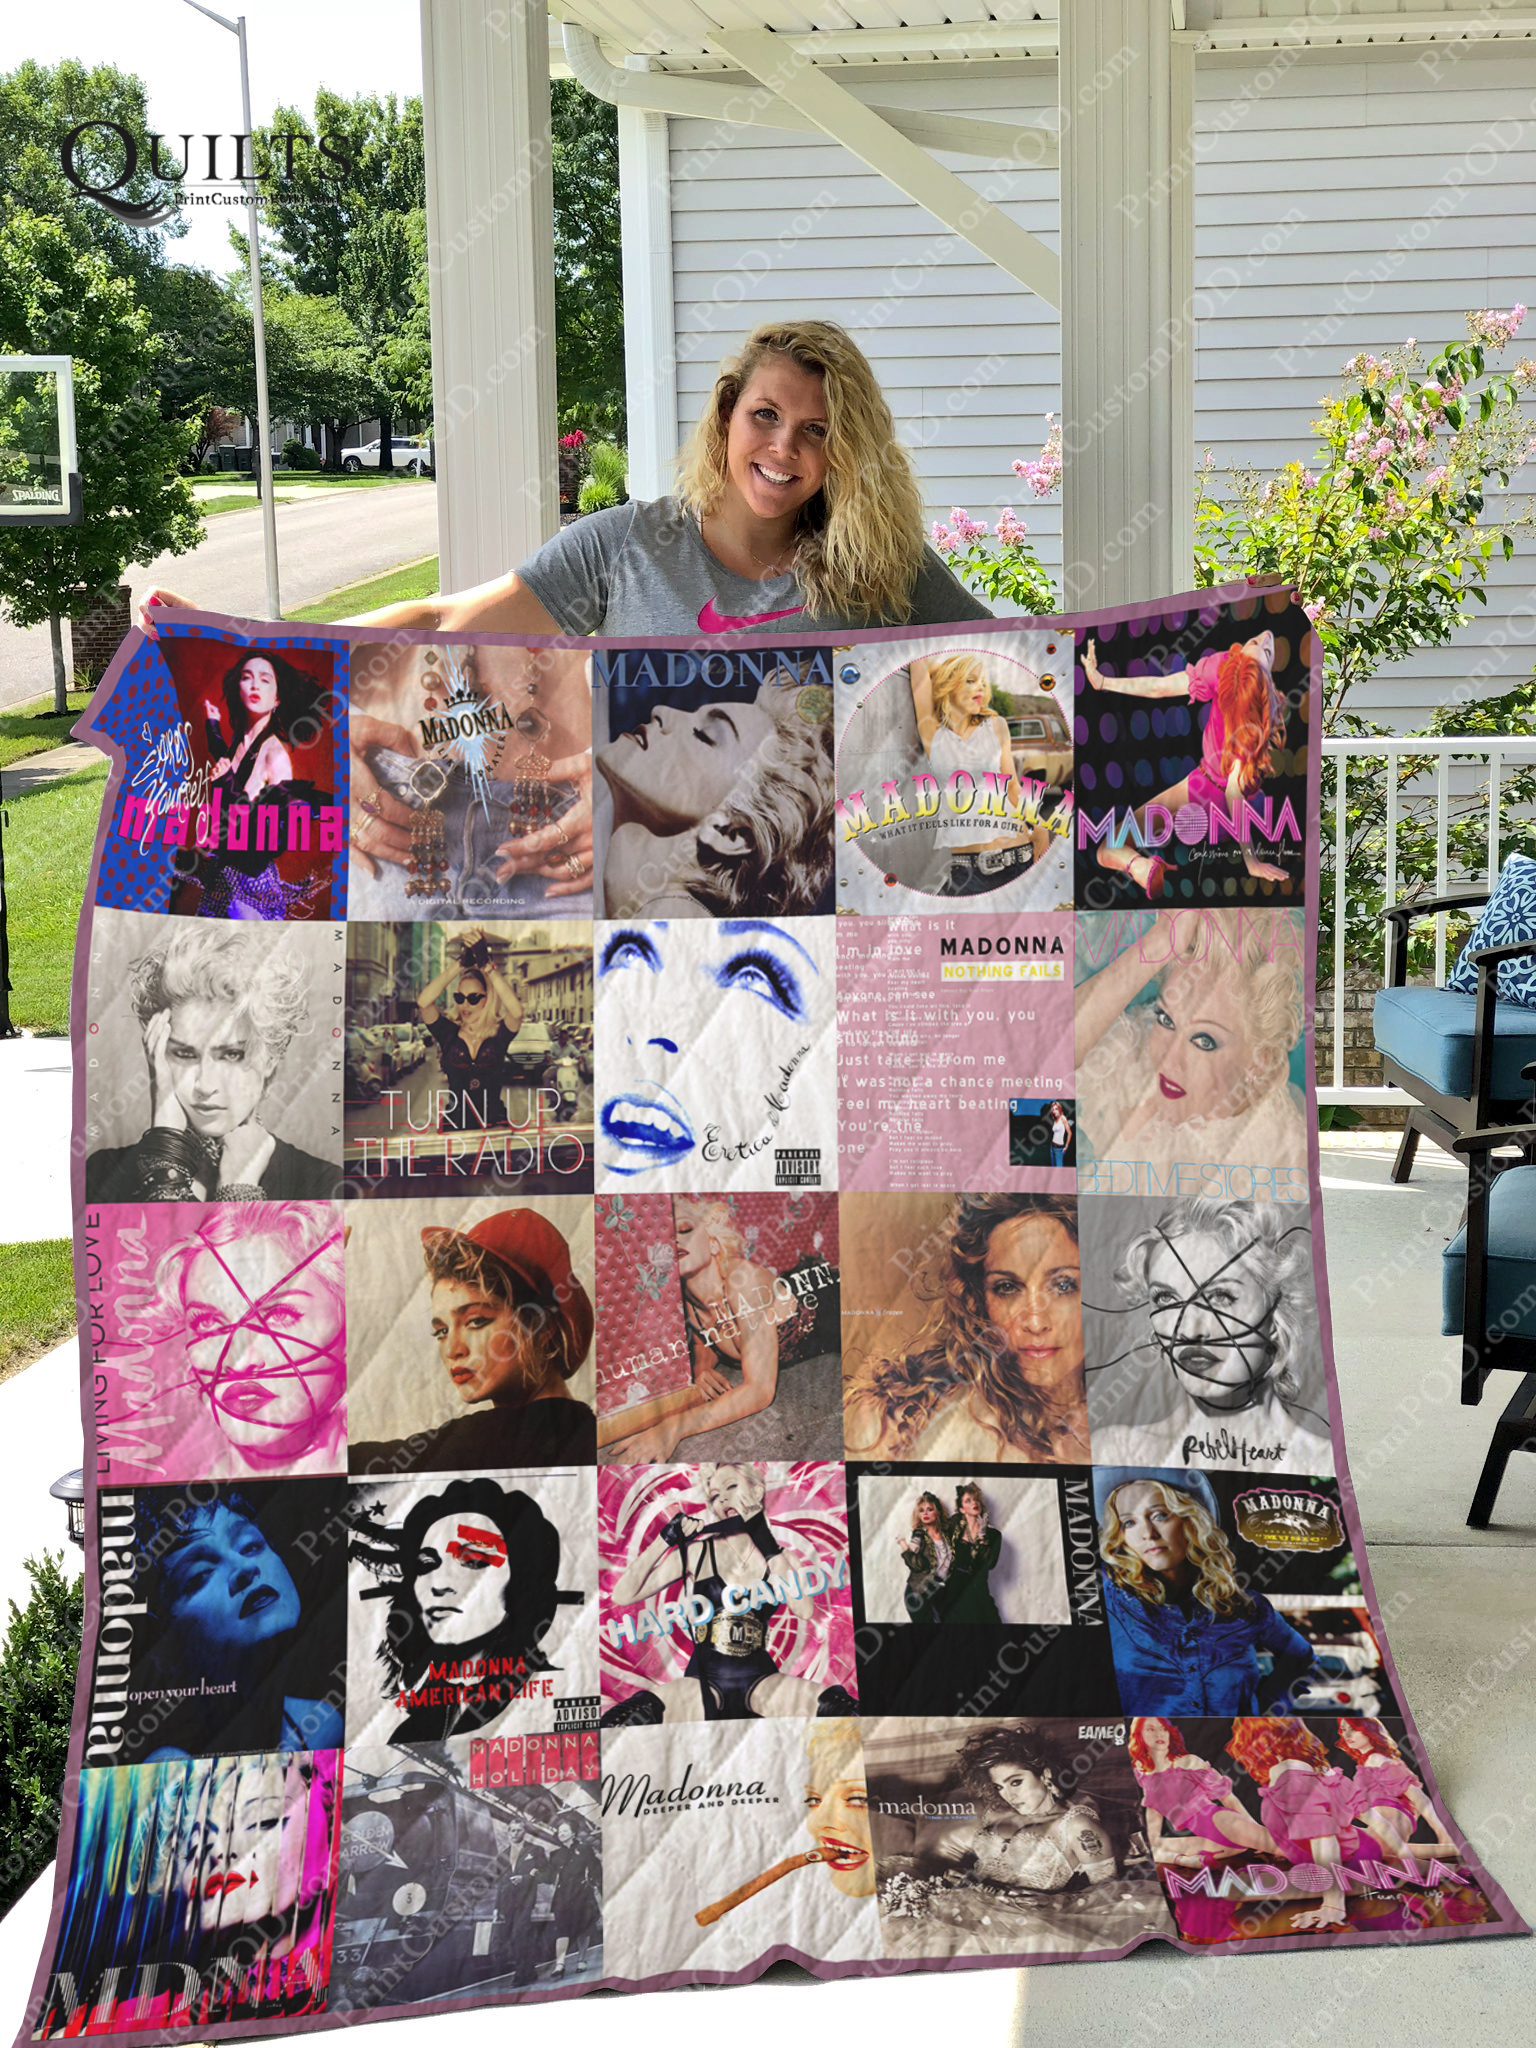 M-madonna Quilt Blanket For Fans Ver 25 - Featured Quilts